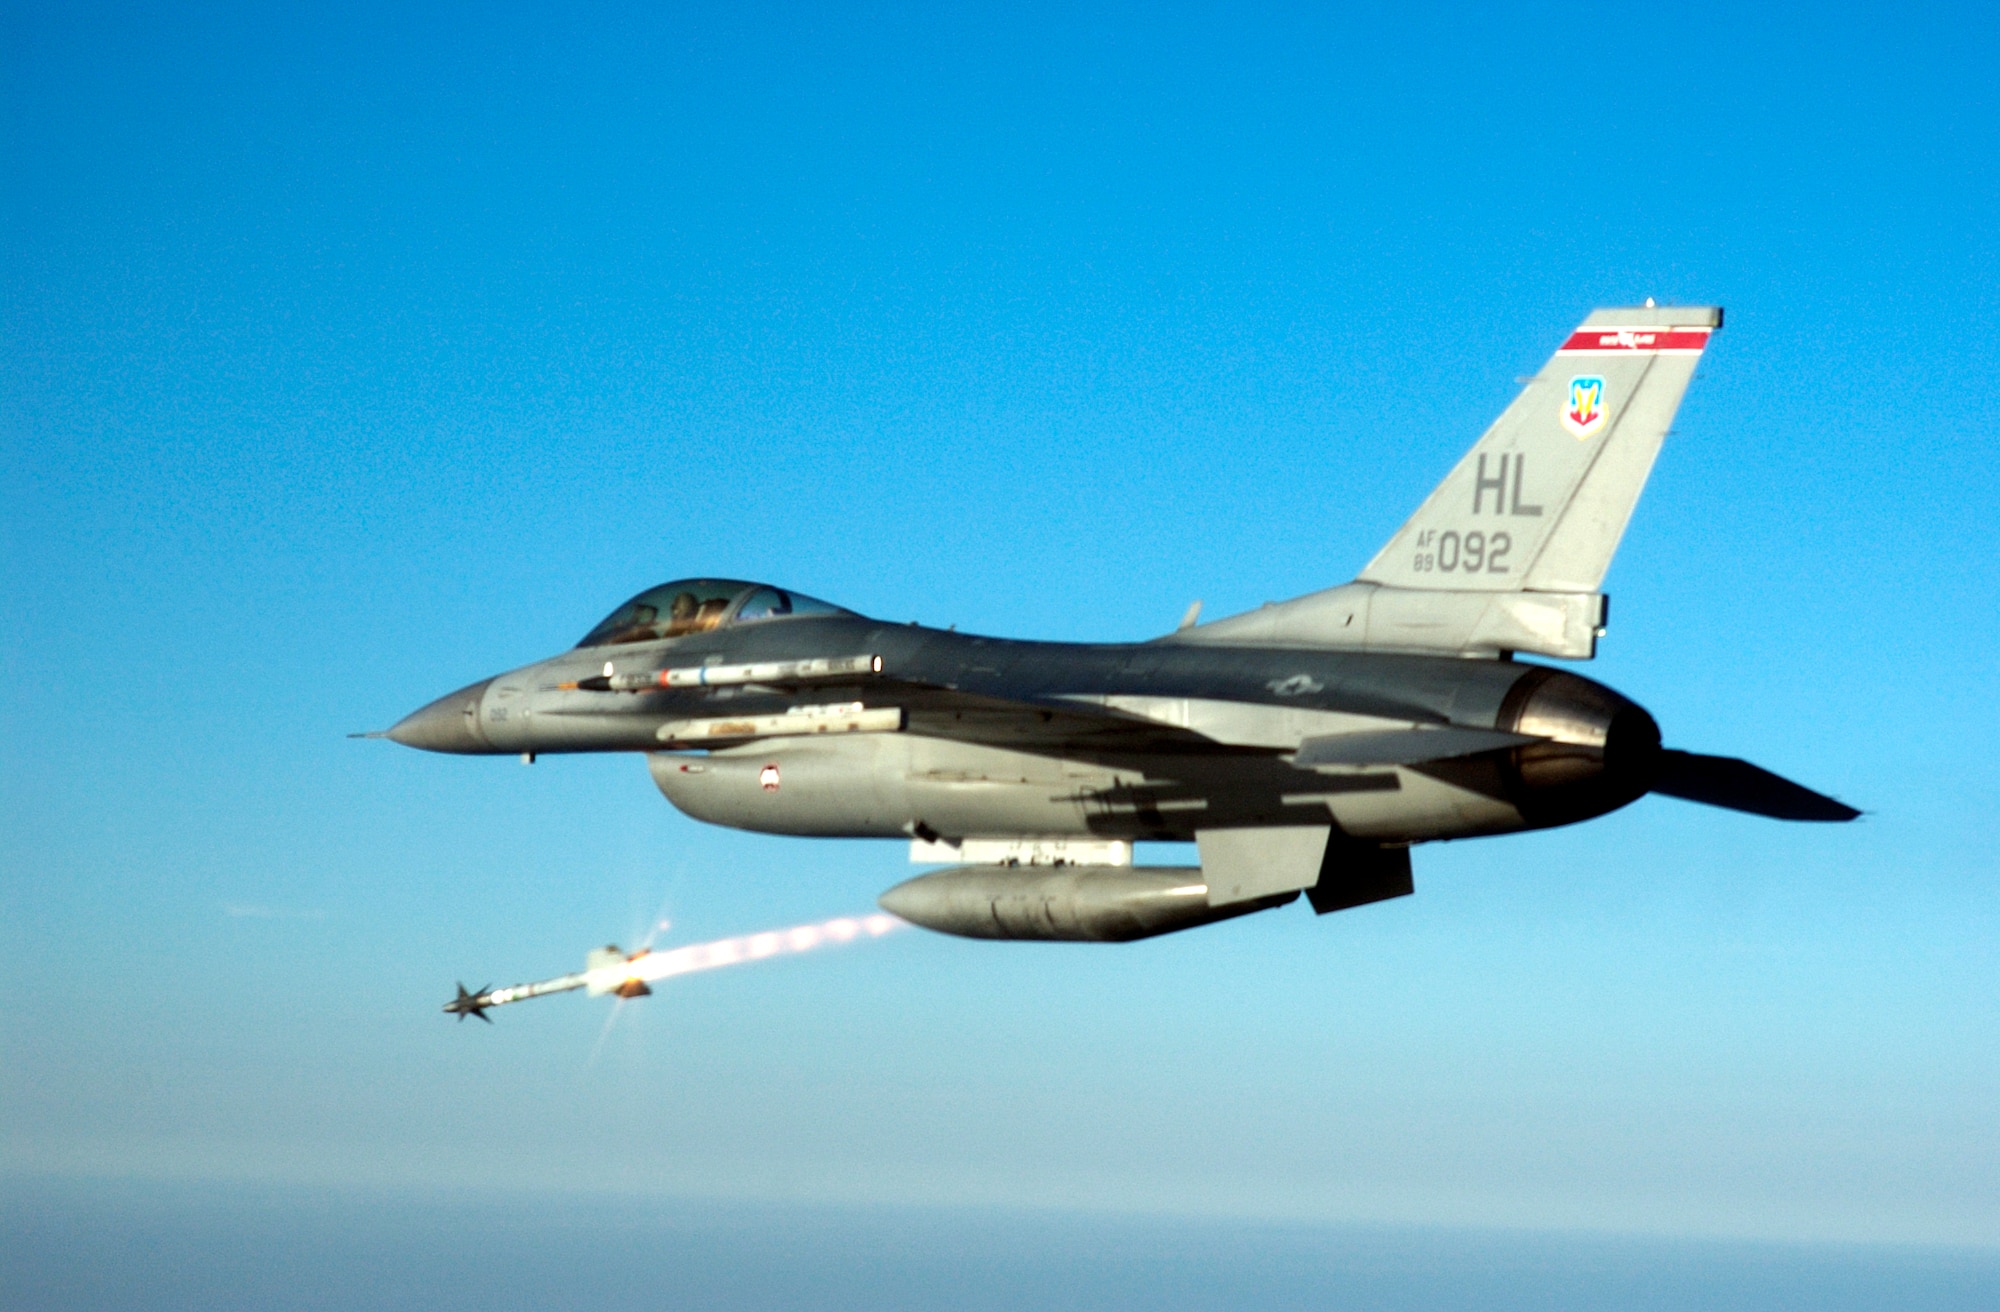 OVER THE GULF OF MEXICO -- Capt. Steve Boatright, an F-16C Fighting Falcon pilot, fires an AIM-9M Sidewinder heat-seeking missile at an aerial target drone over the Gulf of Mexico.  Captain Boatright is assigned to the 34th Fighter Squadron at Hill Air Force Base, Utah.  The squadron recently deployed to Tyndall AFB, Fla., to fly air-to-air weapons testing missions.  (U.S. Air Force photo by Master Sgt. Michael Ammons)